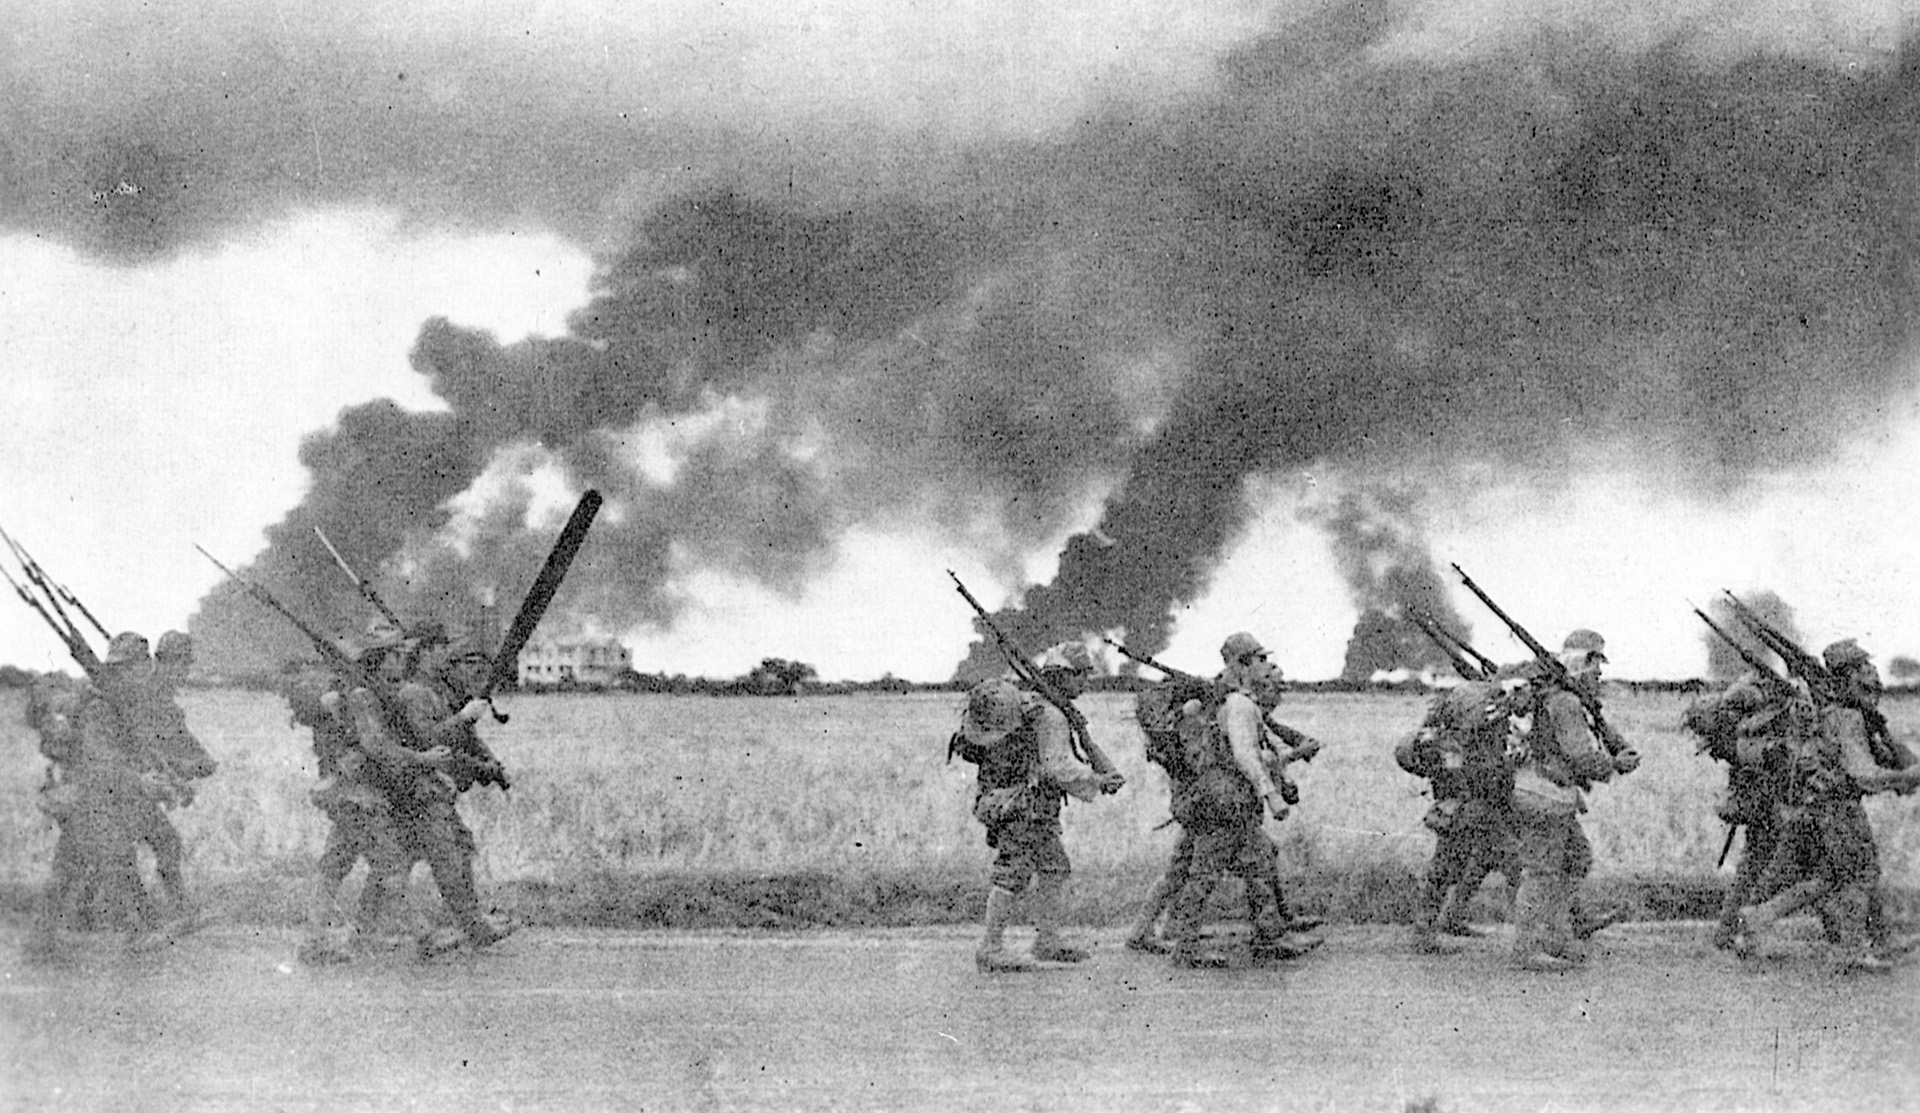 Japanese troops advance swiftly past burning installations of the American military base at Subic Bay in the Philippines.